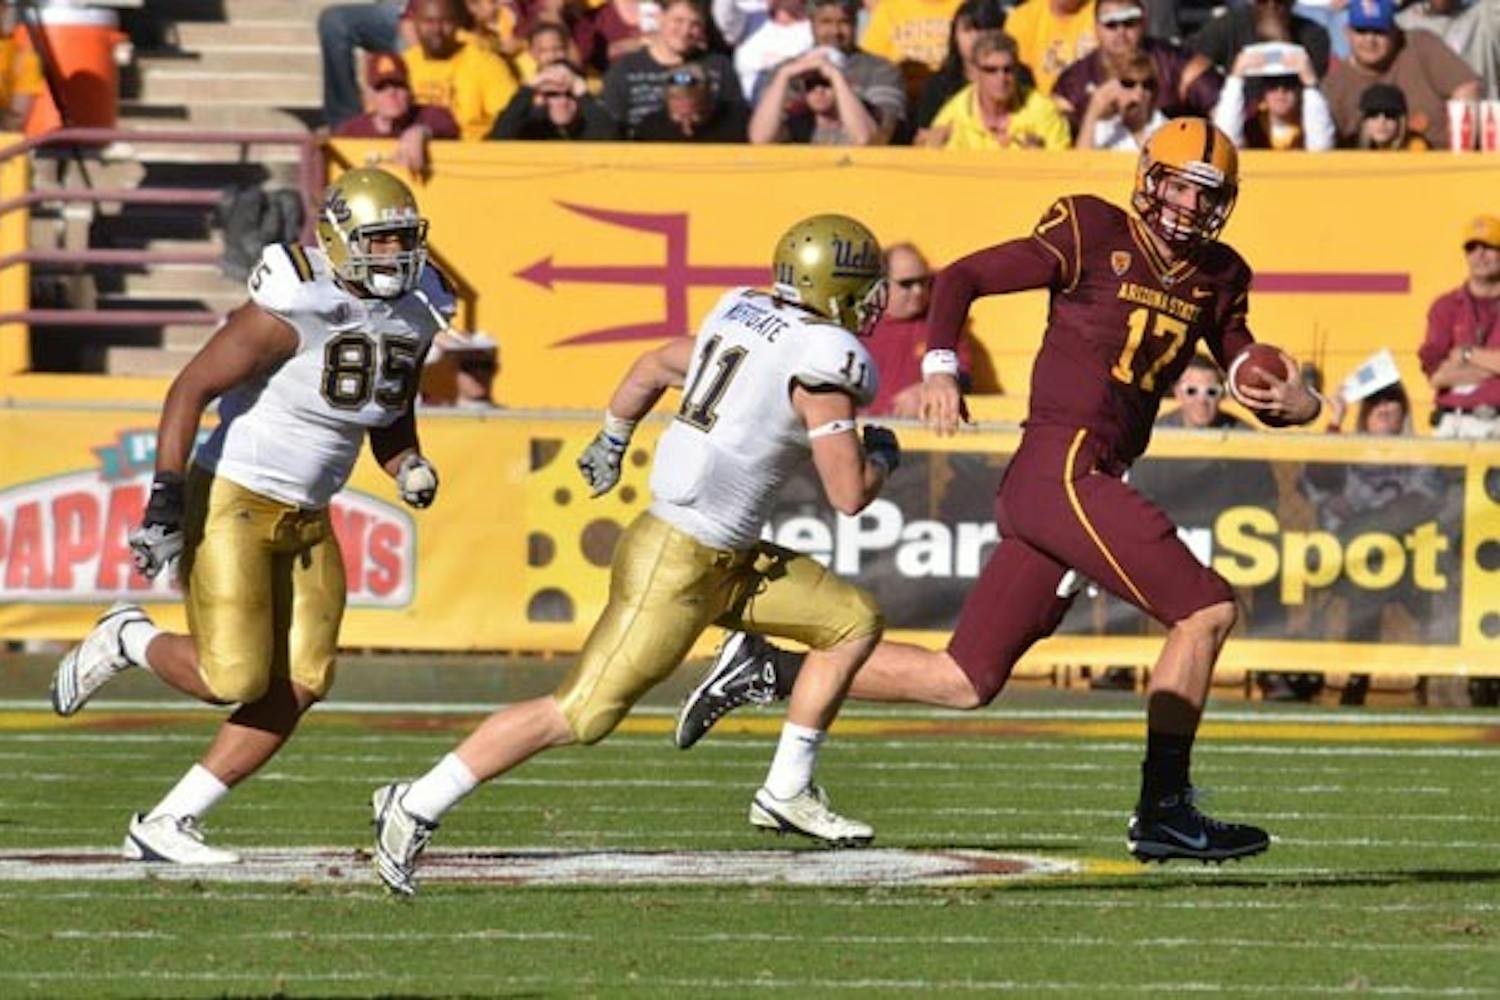 LAST LEGS: Sophomore quarterback Brock Osweiler scrambles from UCLA defenders during last week’s 55-34 ASU win. This week, Osweiler is tasked with picking apart a UA defense that has faltered recently. The Sun Devils need a win to preserve their chance to receive an NCAA waiver for a bowl game. (Photo by Aaron Lavinsky)